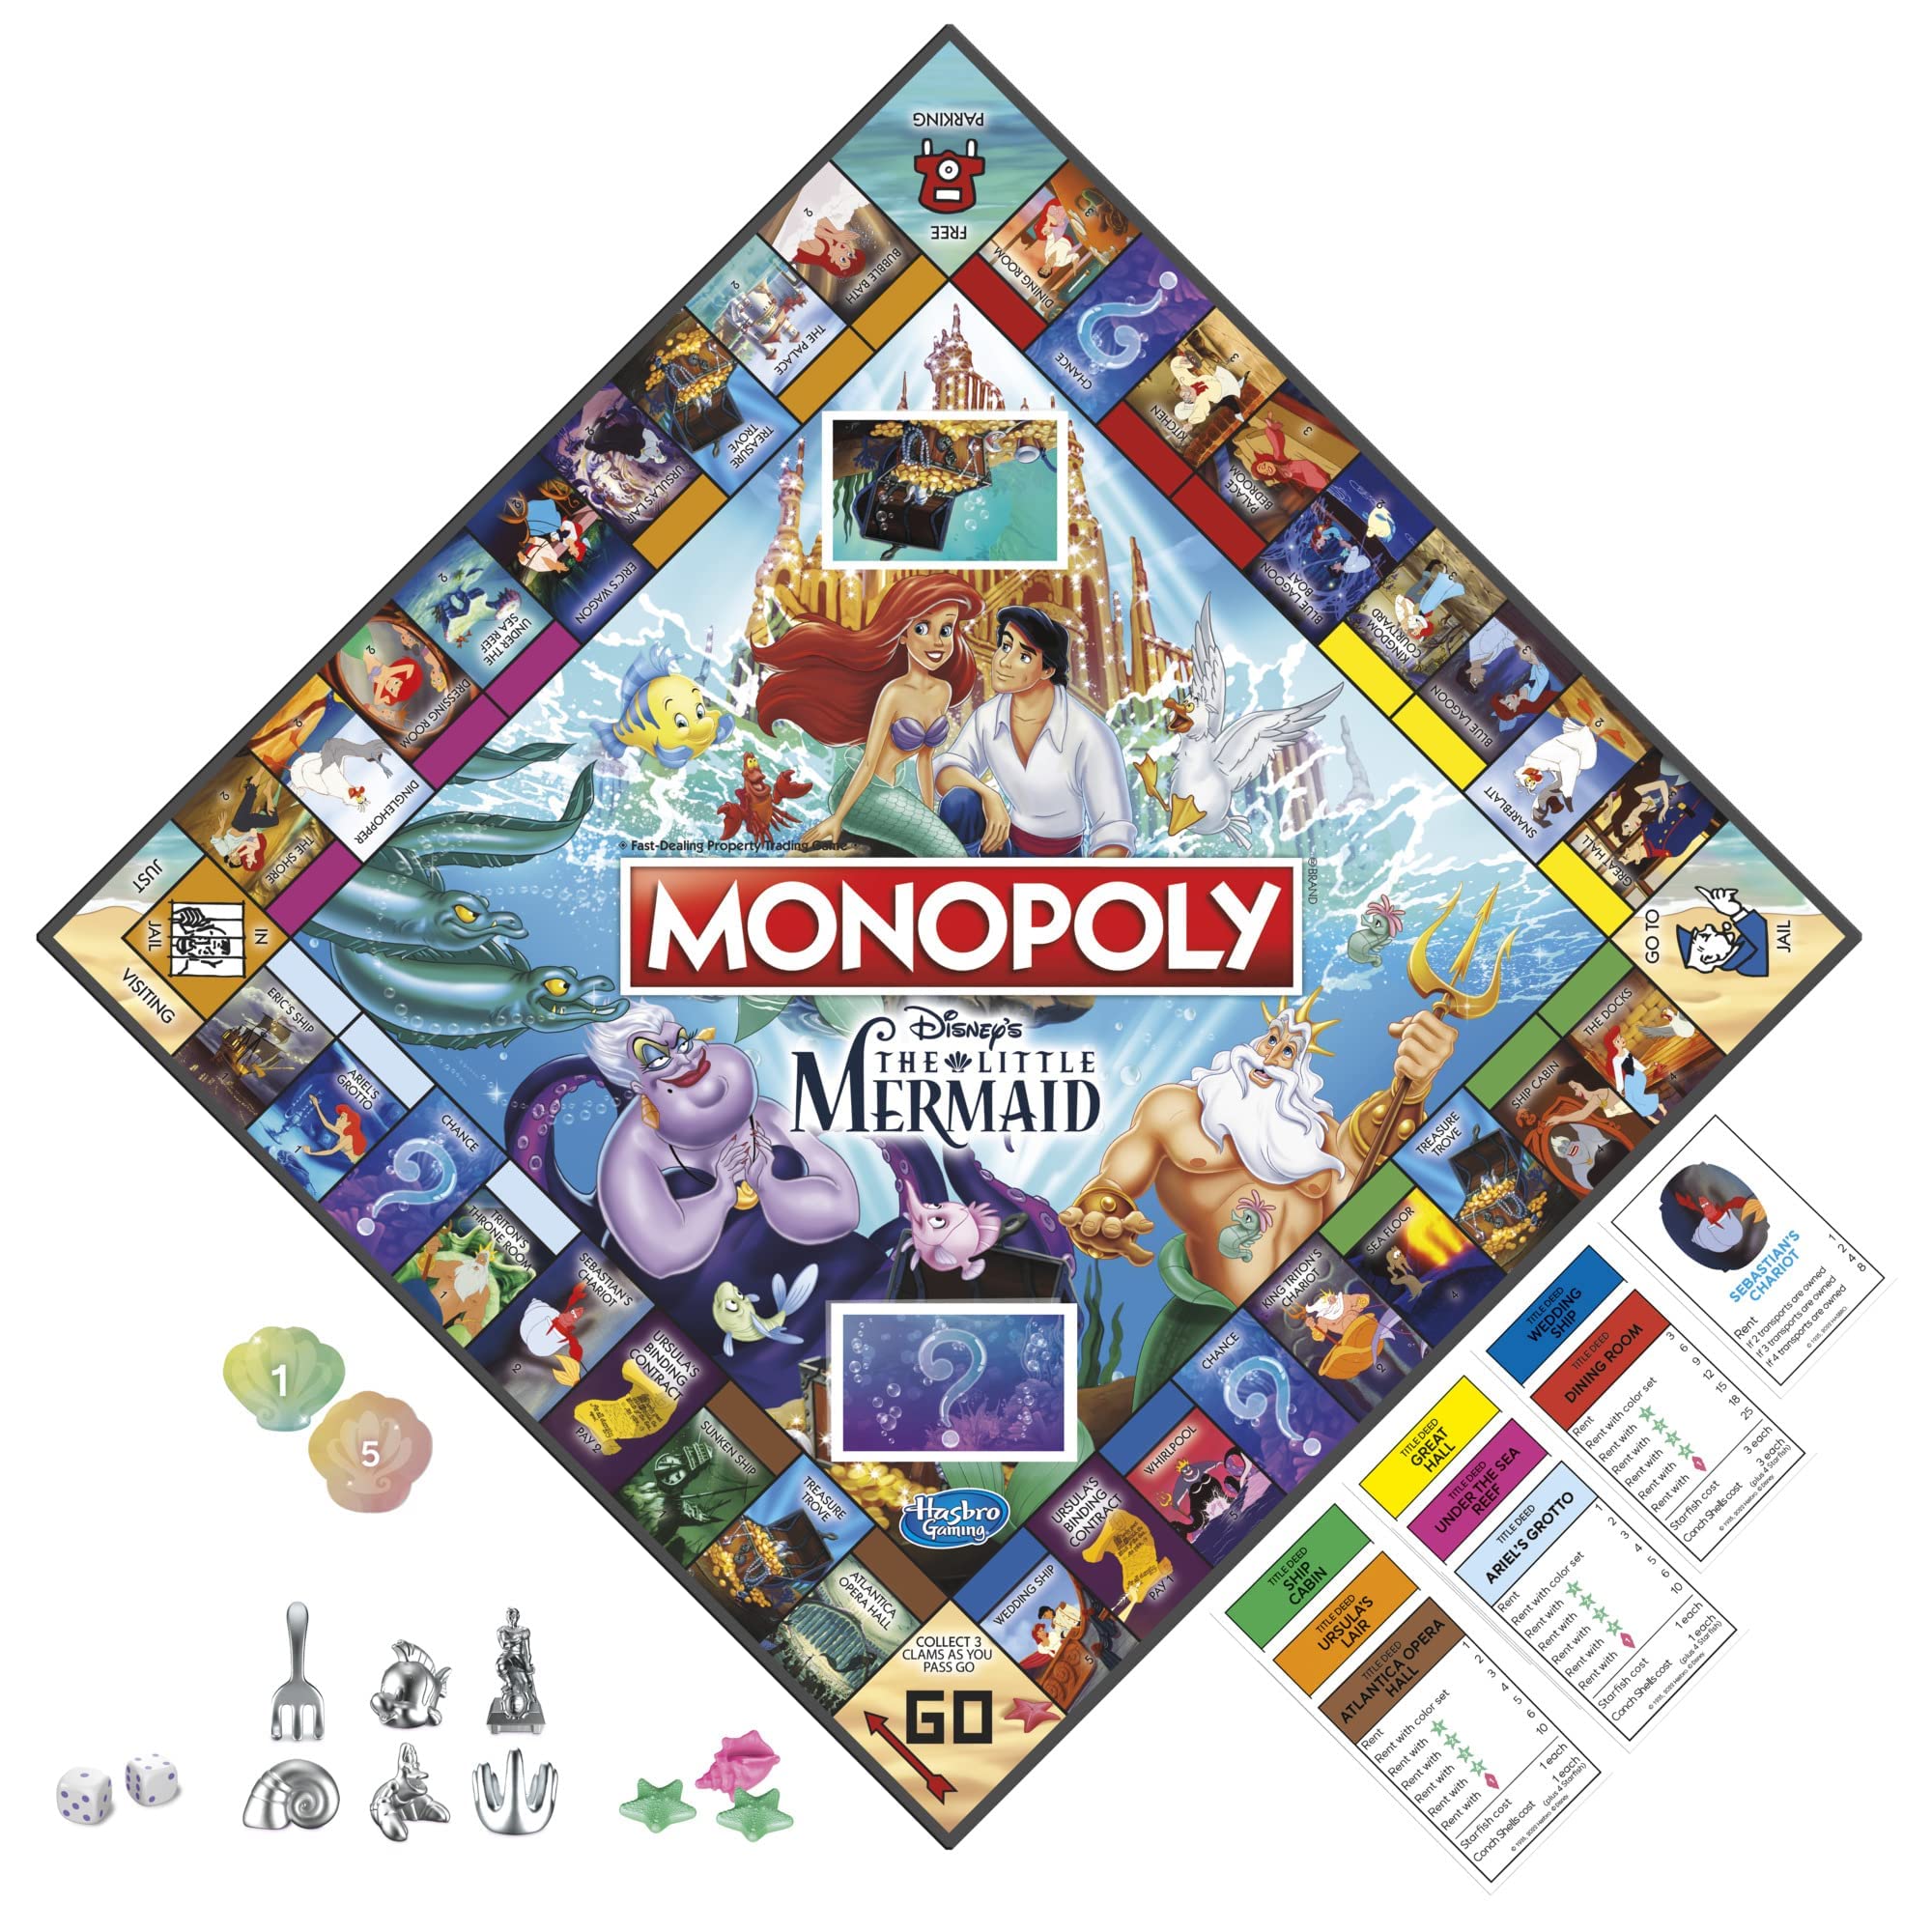 Monopoly: Disney's The Little Mermaid Edition Board Game, 2-6 Players for Family and Kids Ages 8+, with 6 Themed Monopoly Tokens (Amazon Exclusive)